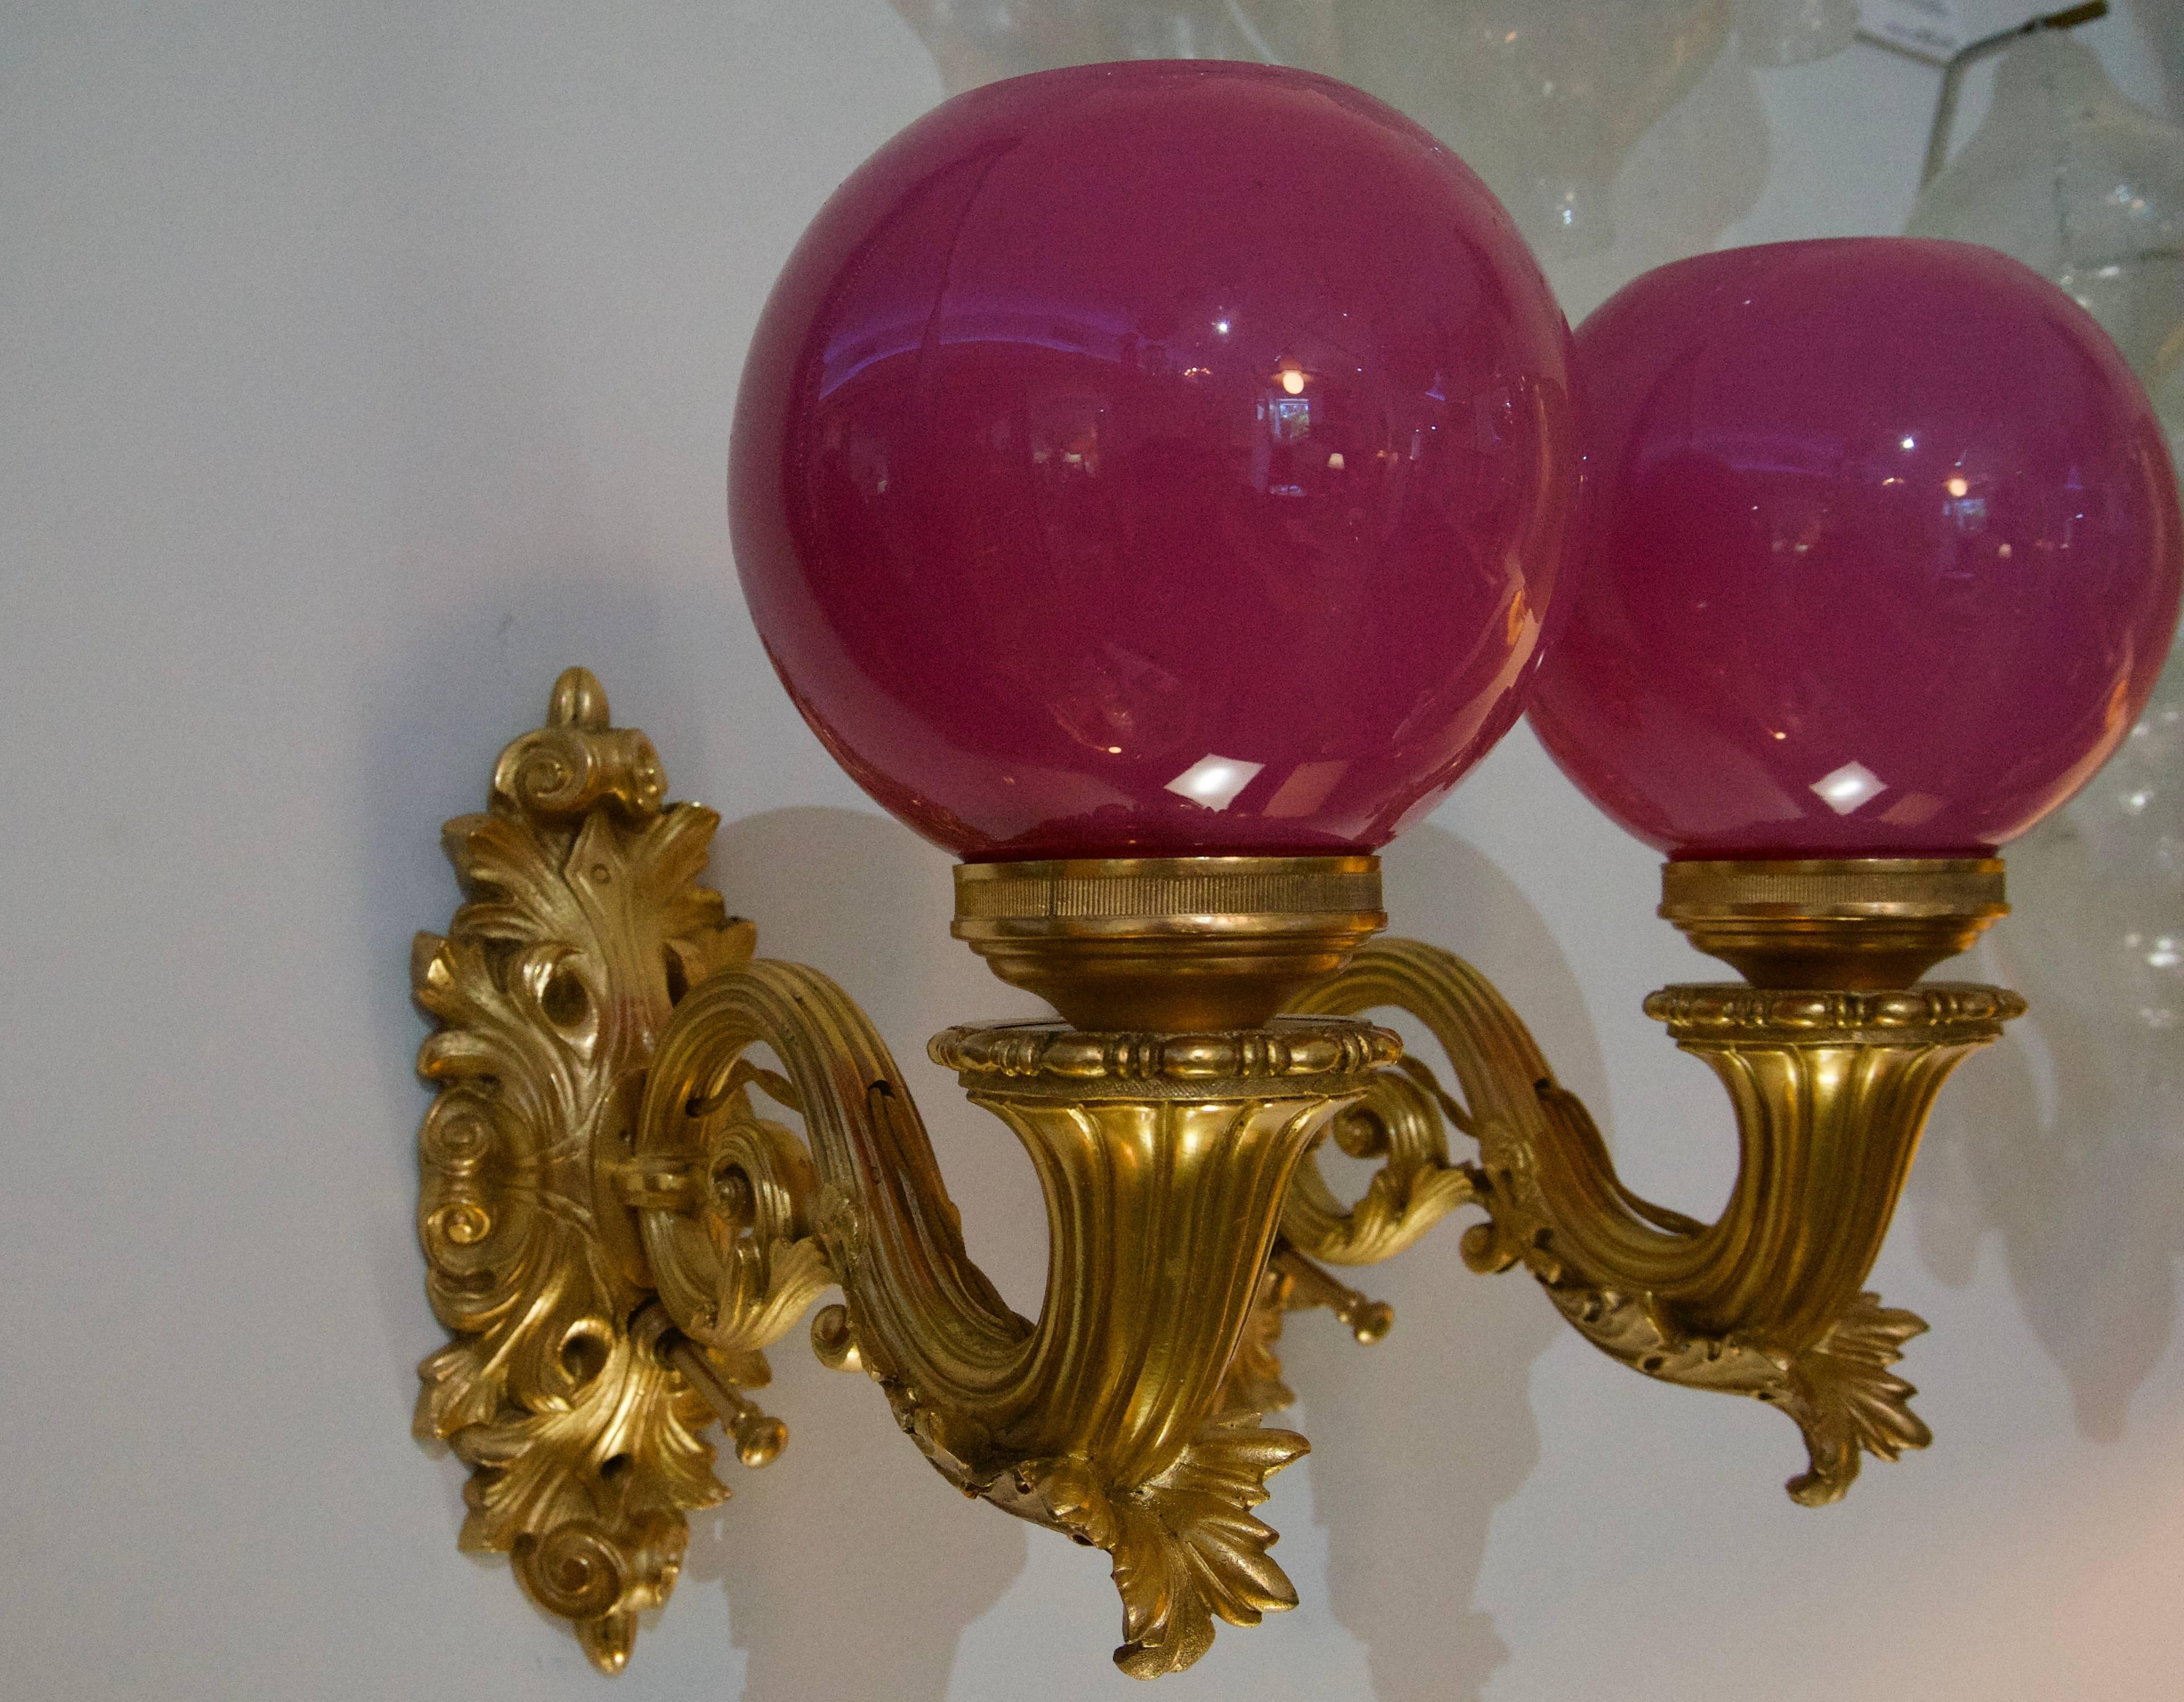 This stylish and chic pair of wall sconces were acquired from a Palm Beach estate and will make a definite statement with their deep fuschia pink globes and gilt gold plating.

Note: These can be hardwired with a wall switch or use the hand switch